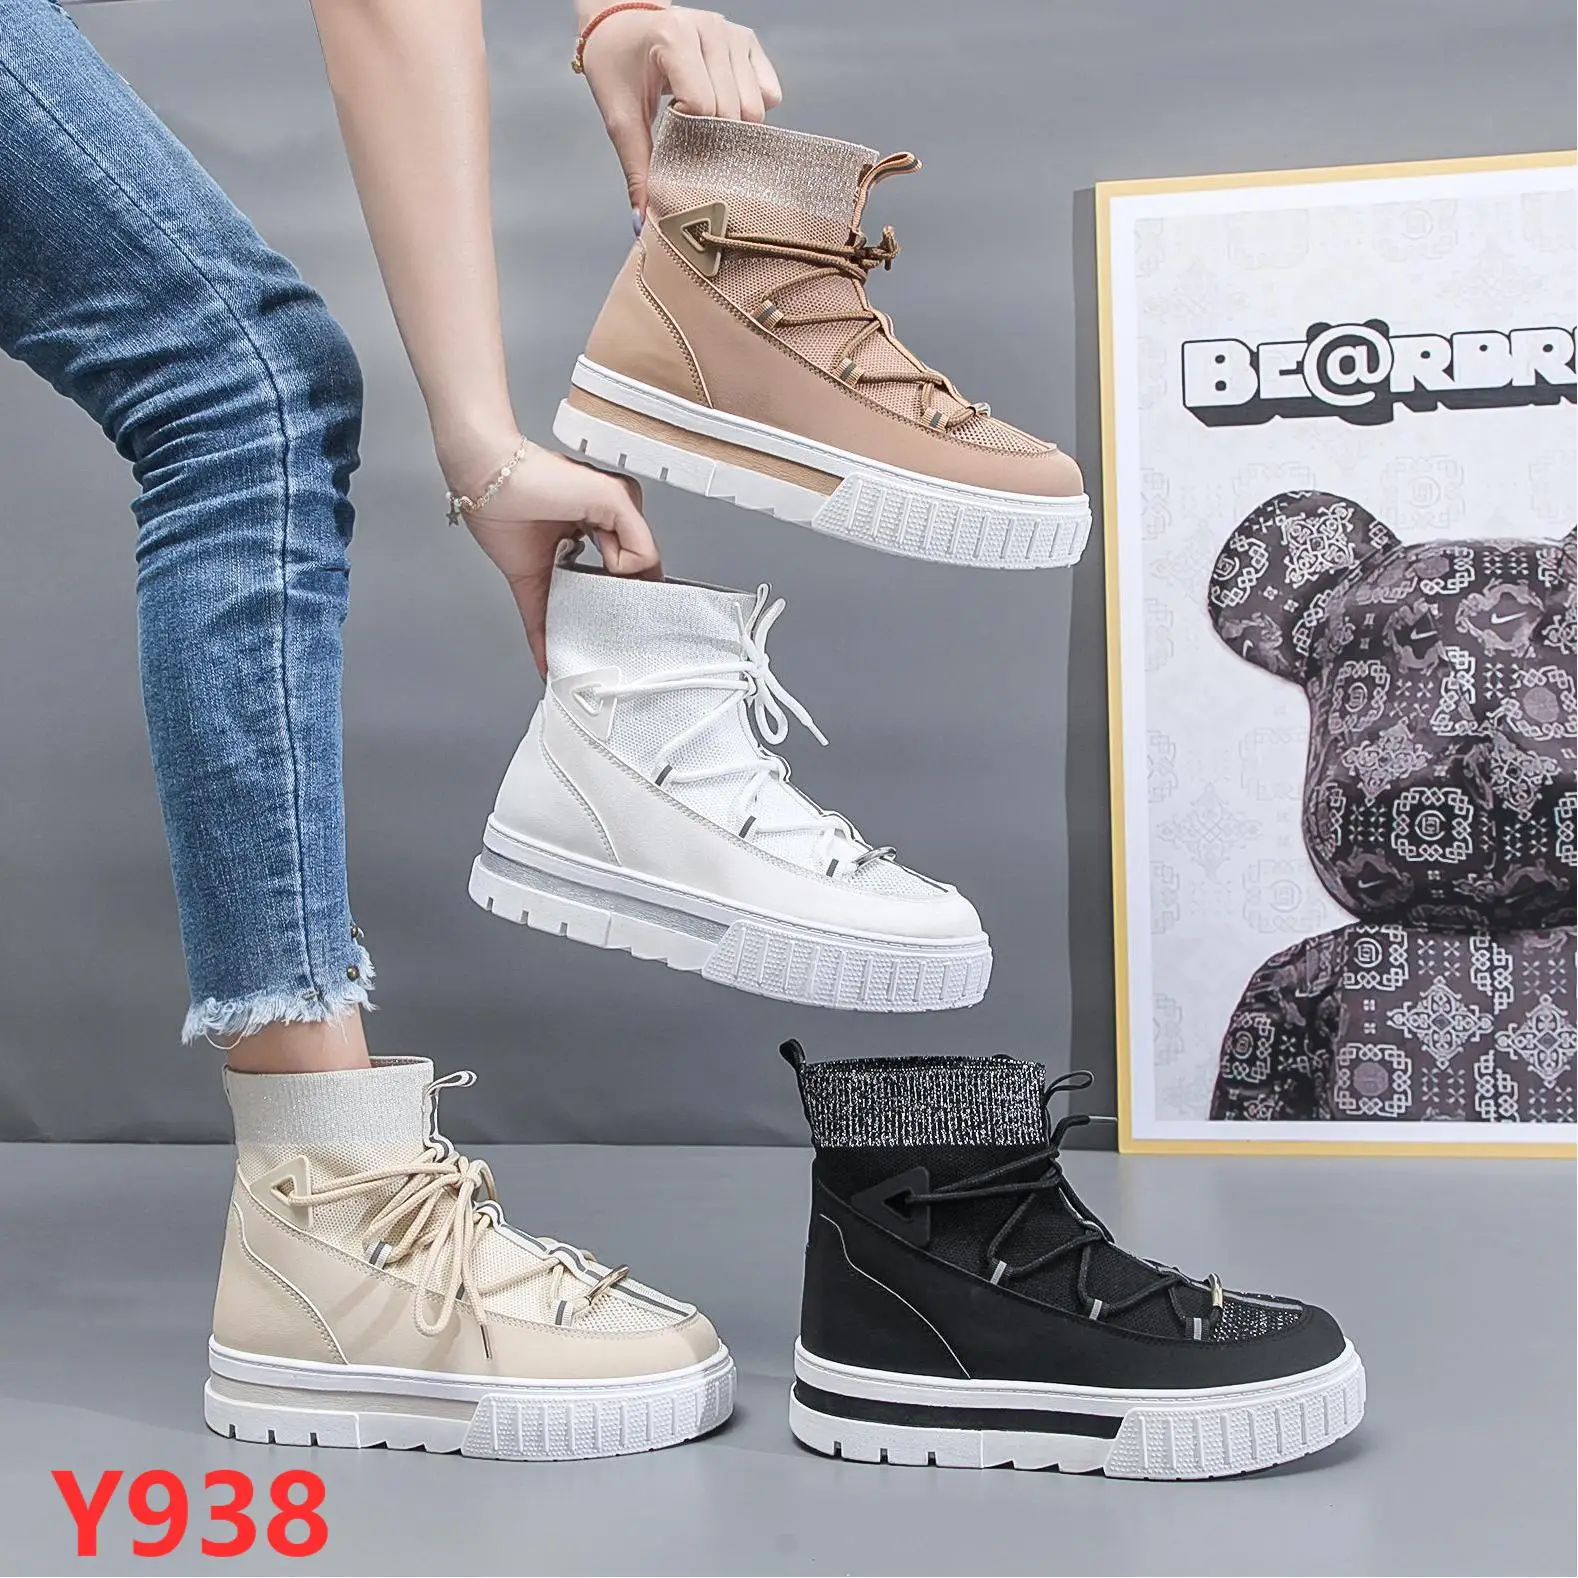 injection soles cheap price customized high cut women tennis shoes women Lace up boots net sneakers